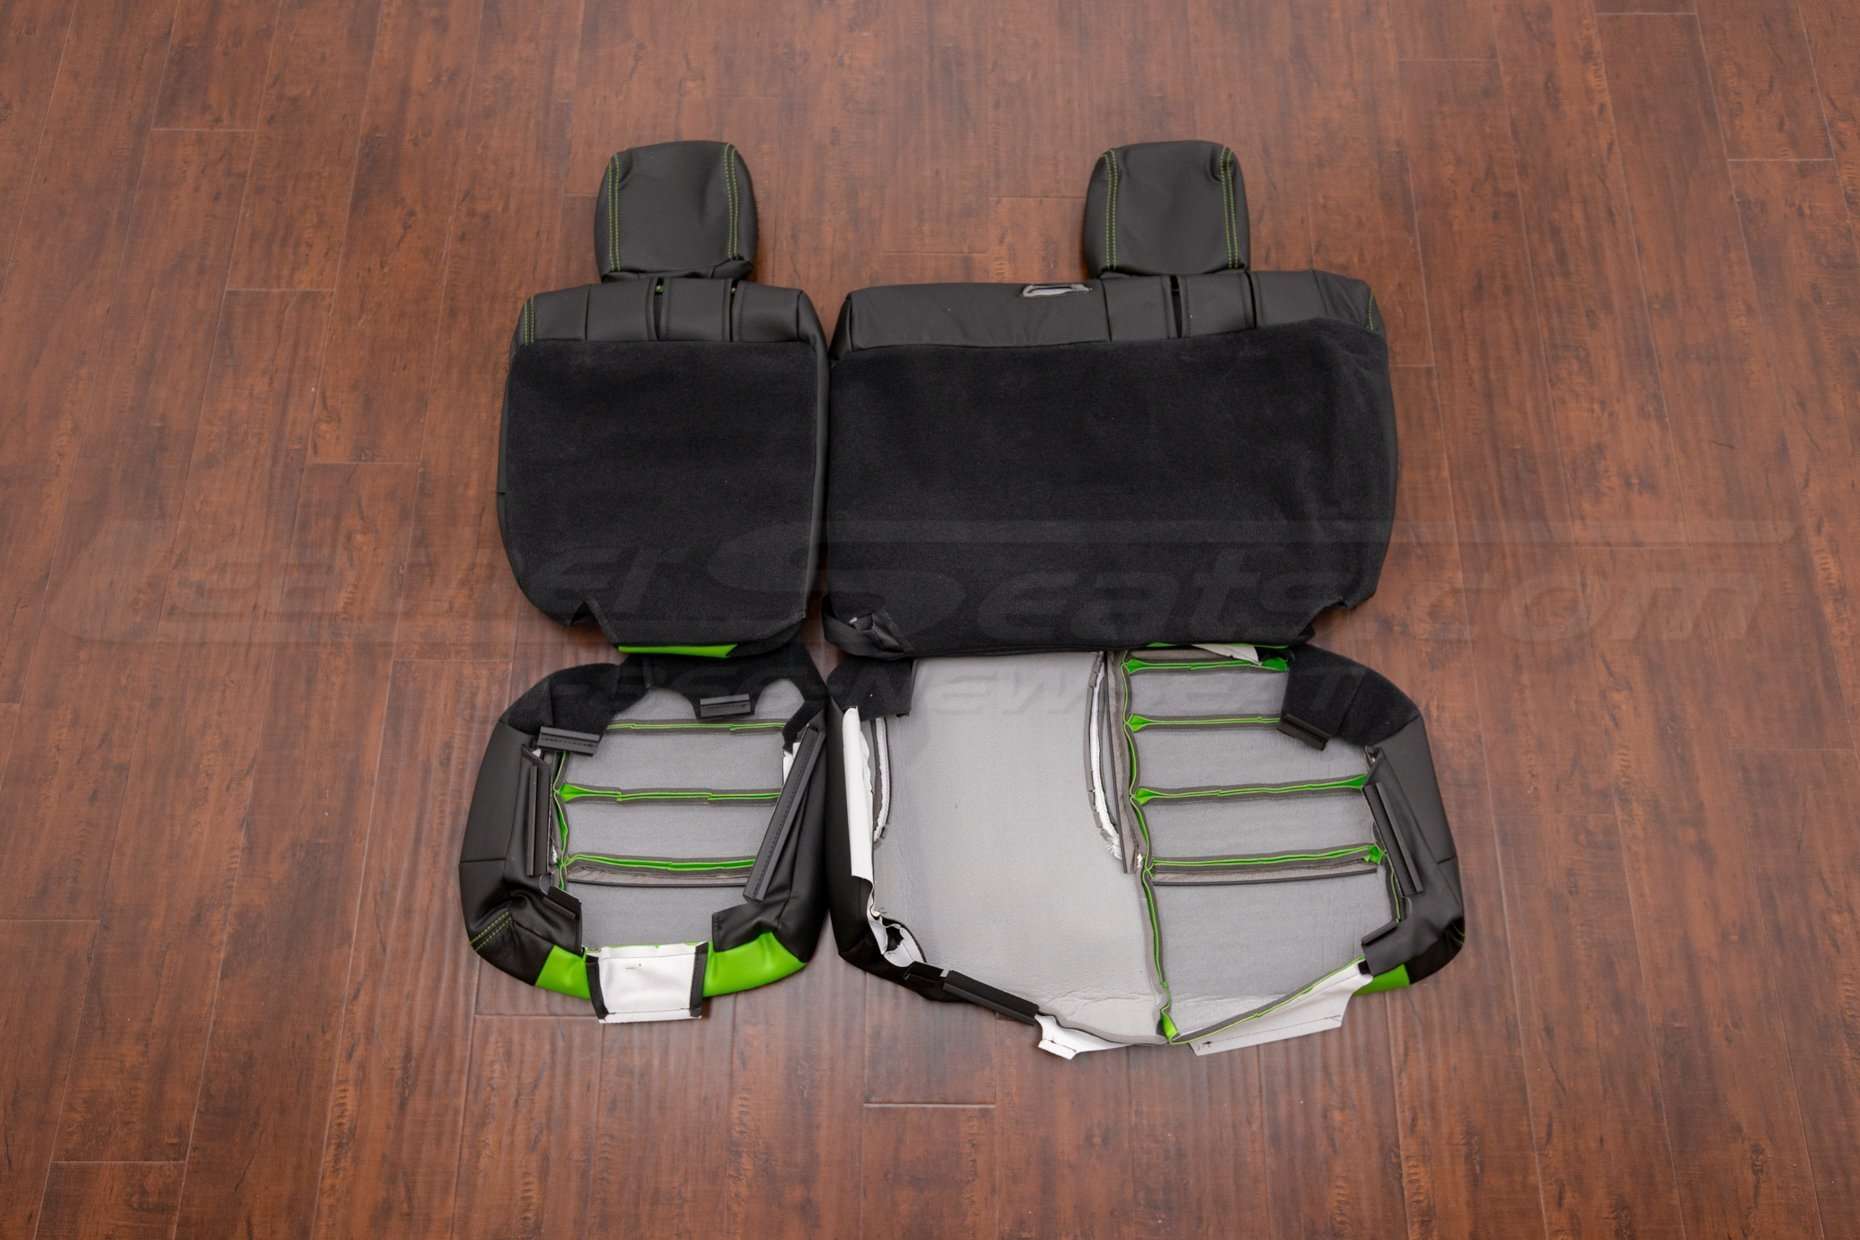 Jeep Wrangler Upholstery Kit - Black & Lime Green - Back view of rear seats